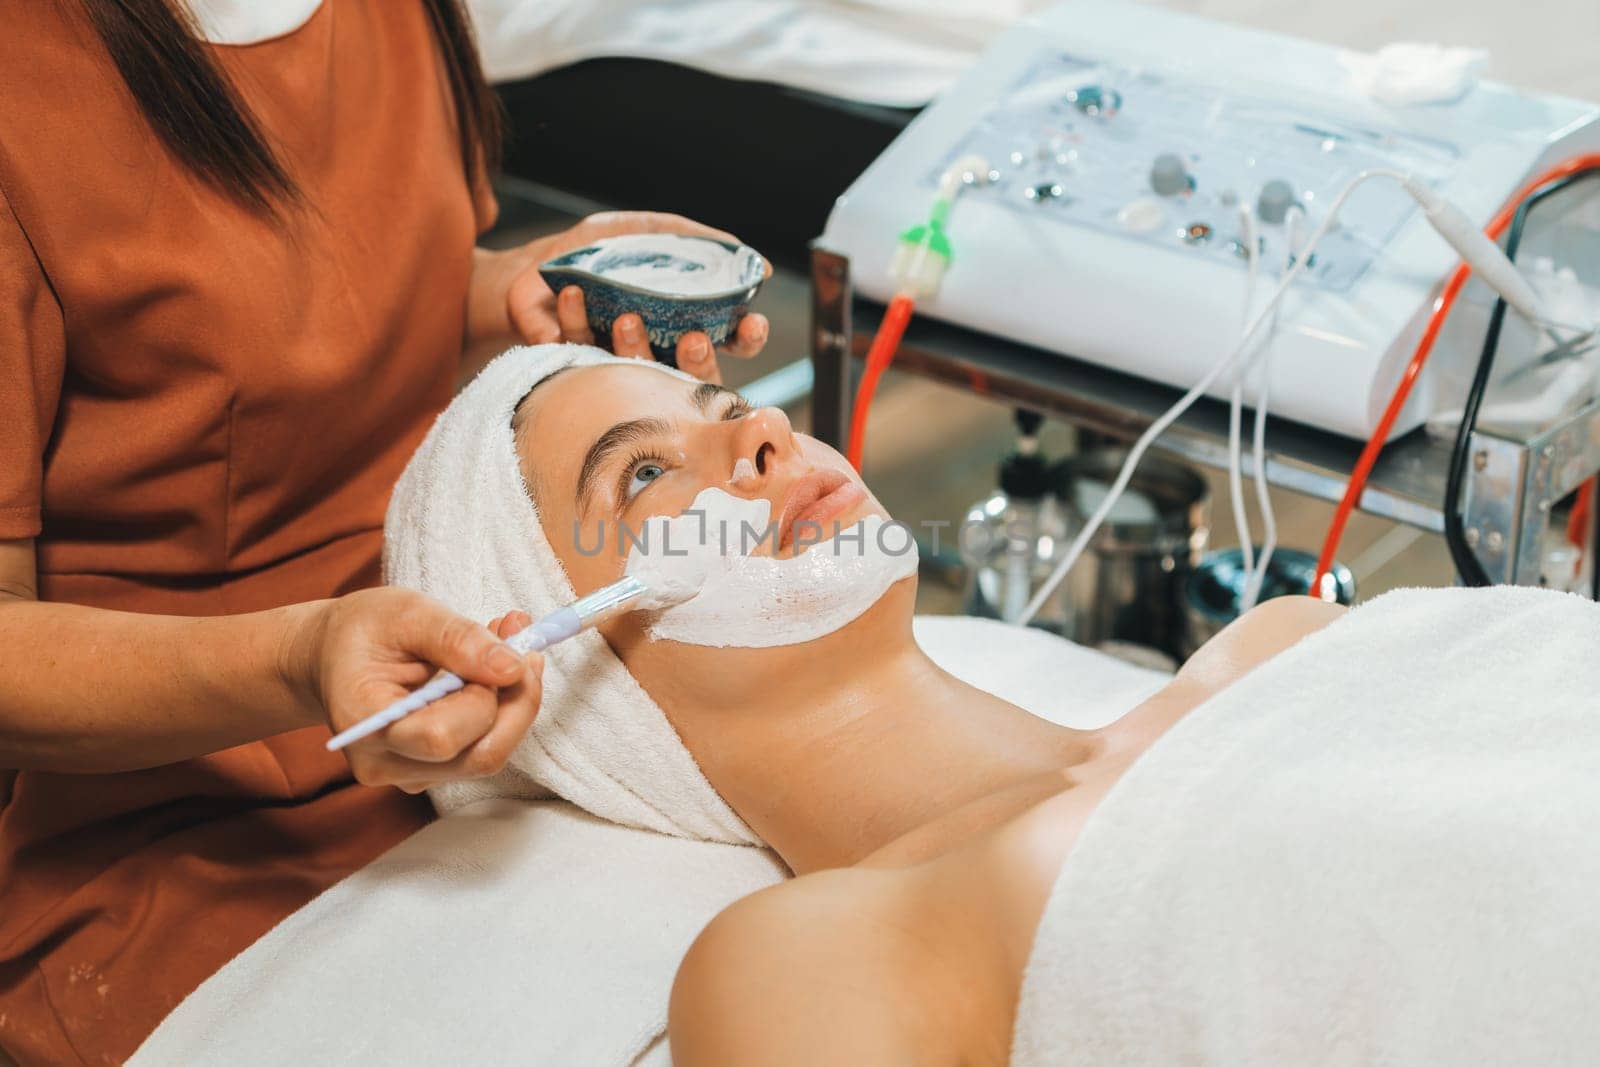 Beautiful young women lie on spa bed while having facial massage from professional doctor. Attractive female with beautiful skin surrounded by electric facial machine. Tranquility.